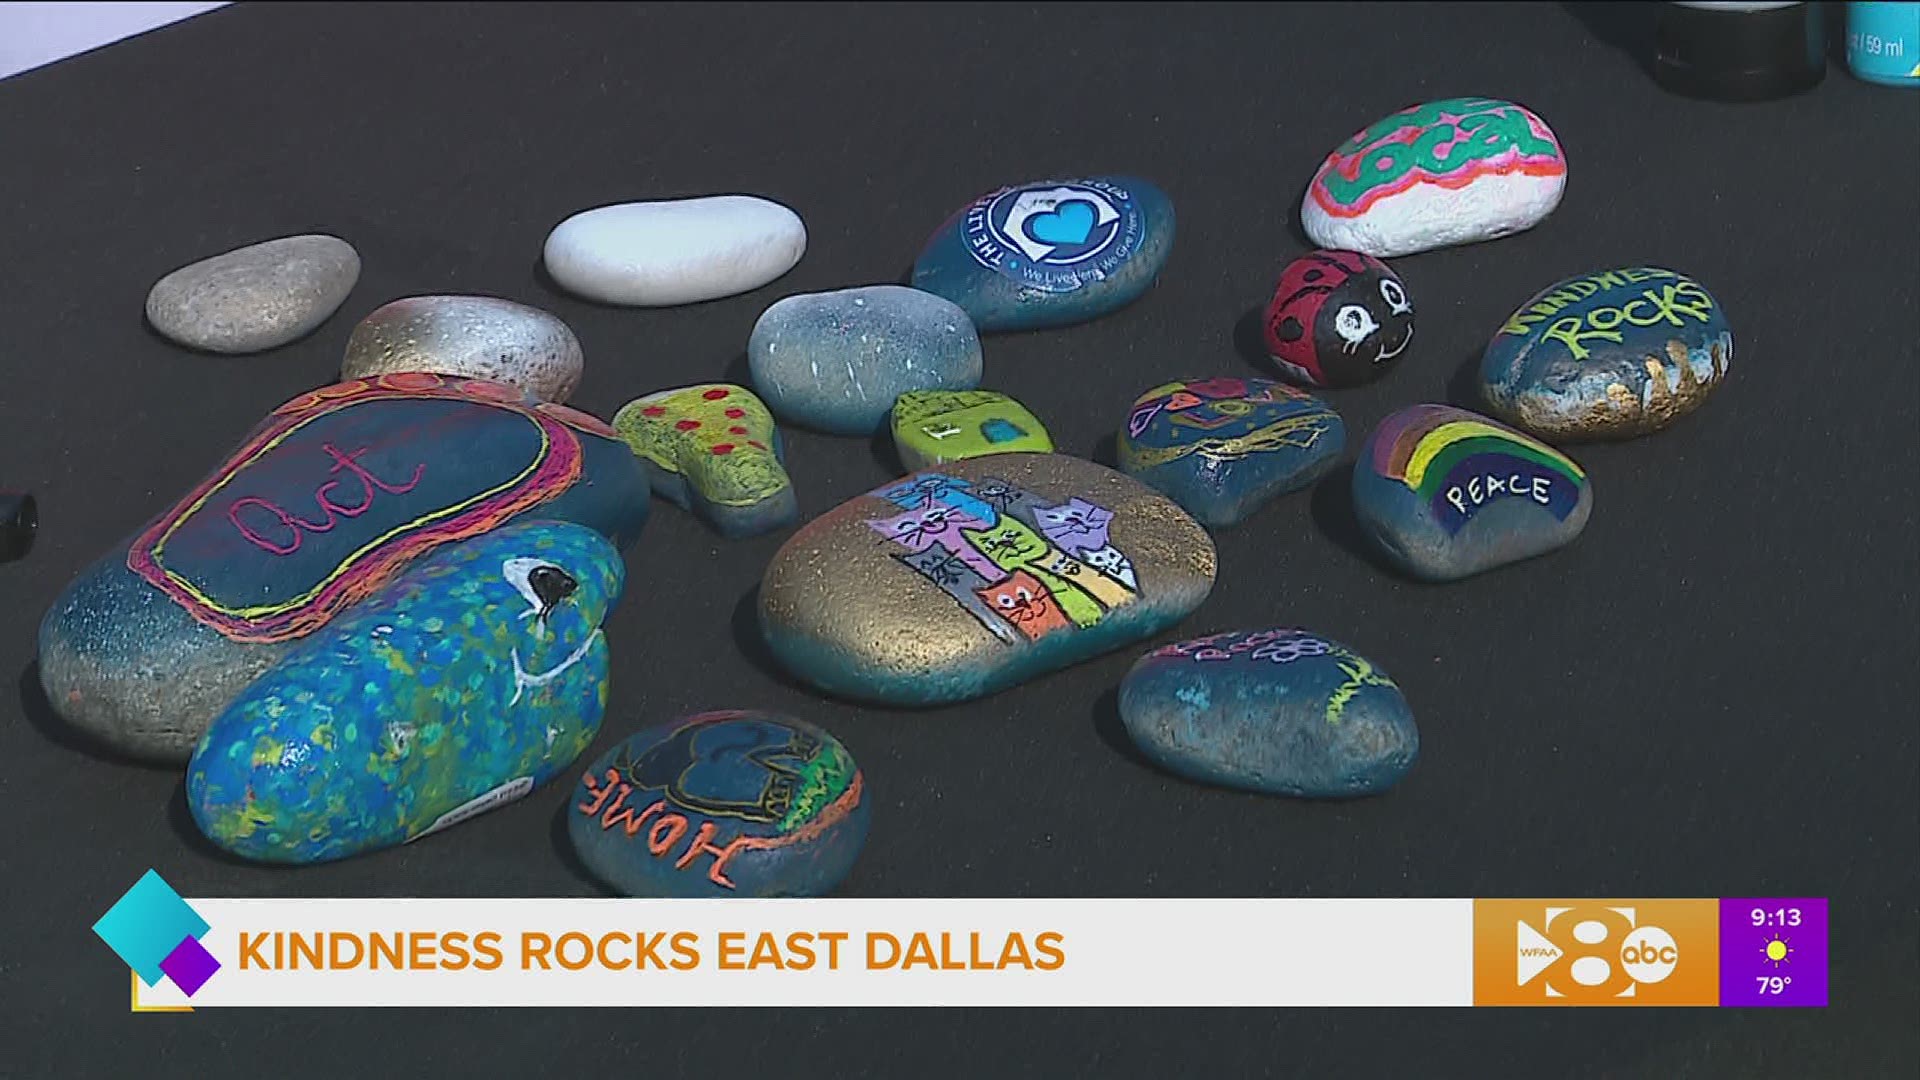 Karen Cuskey shares the inspiration behind her hand-painted rocks